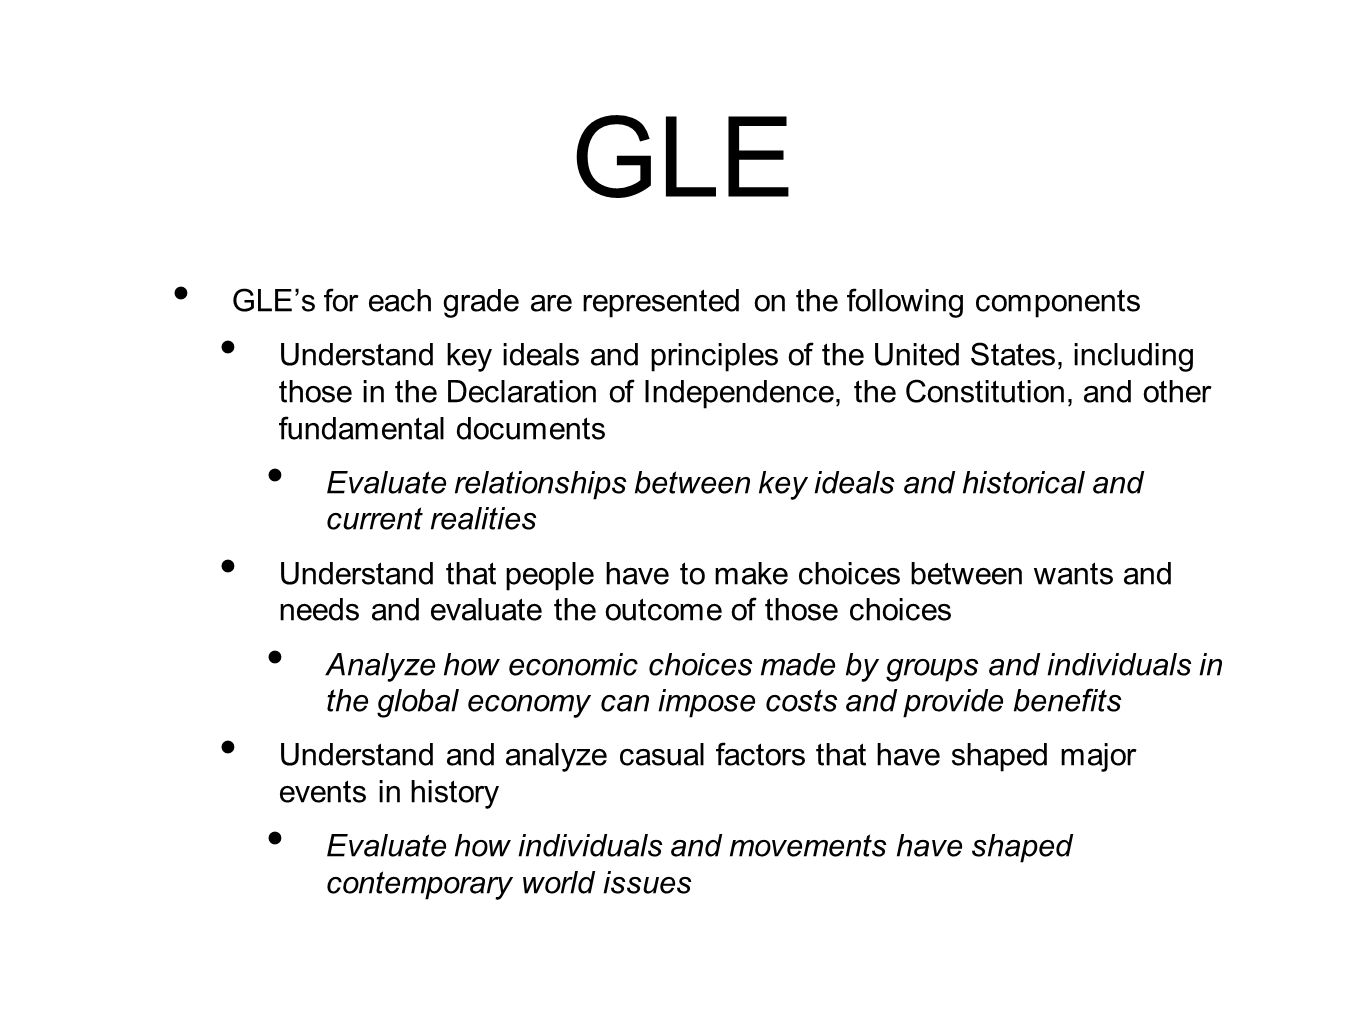 GLE GLE’s for each grade are represented on the following components Understand key ideals and principles of the United States, including those in the Declaration of Independence, the Constitution, and other fundamental documents Evaluate relationships between key ideals and historical and current realities Understand that people have to make choices between wants and needs and evaluate the outcome of those choices Analyze how economic choices made by groups and individuals in the global economy can impose costs and provide benefits Understand and analyze casual factors that have shaped major events in history Evaluate how individuals and movements have shaped contemporary world issues